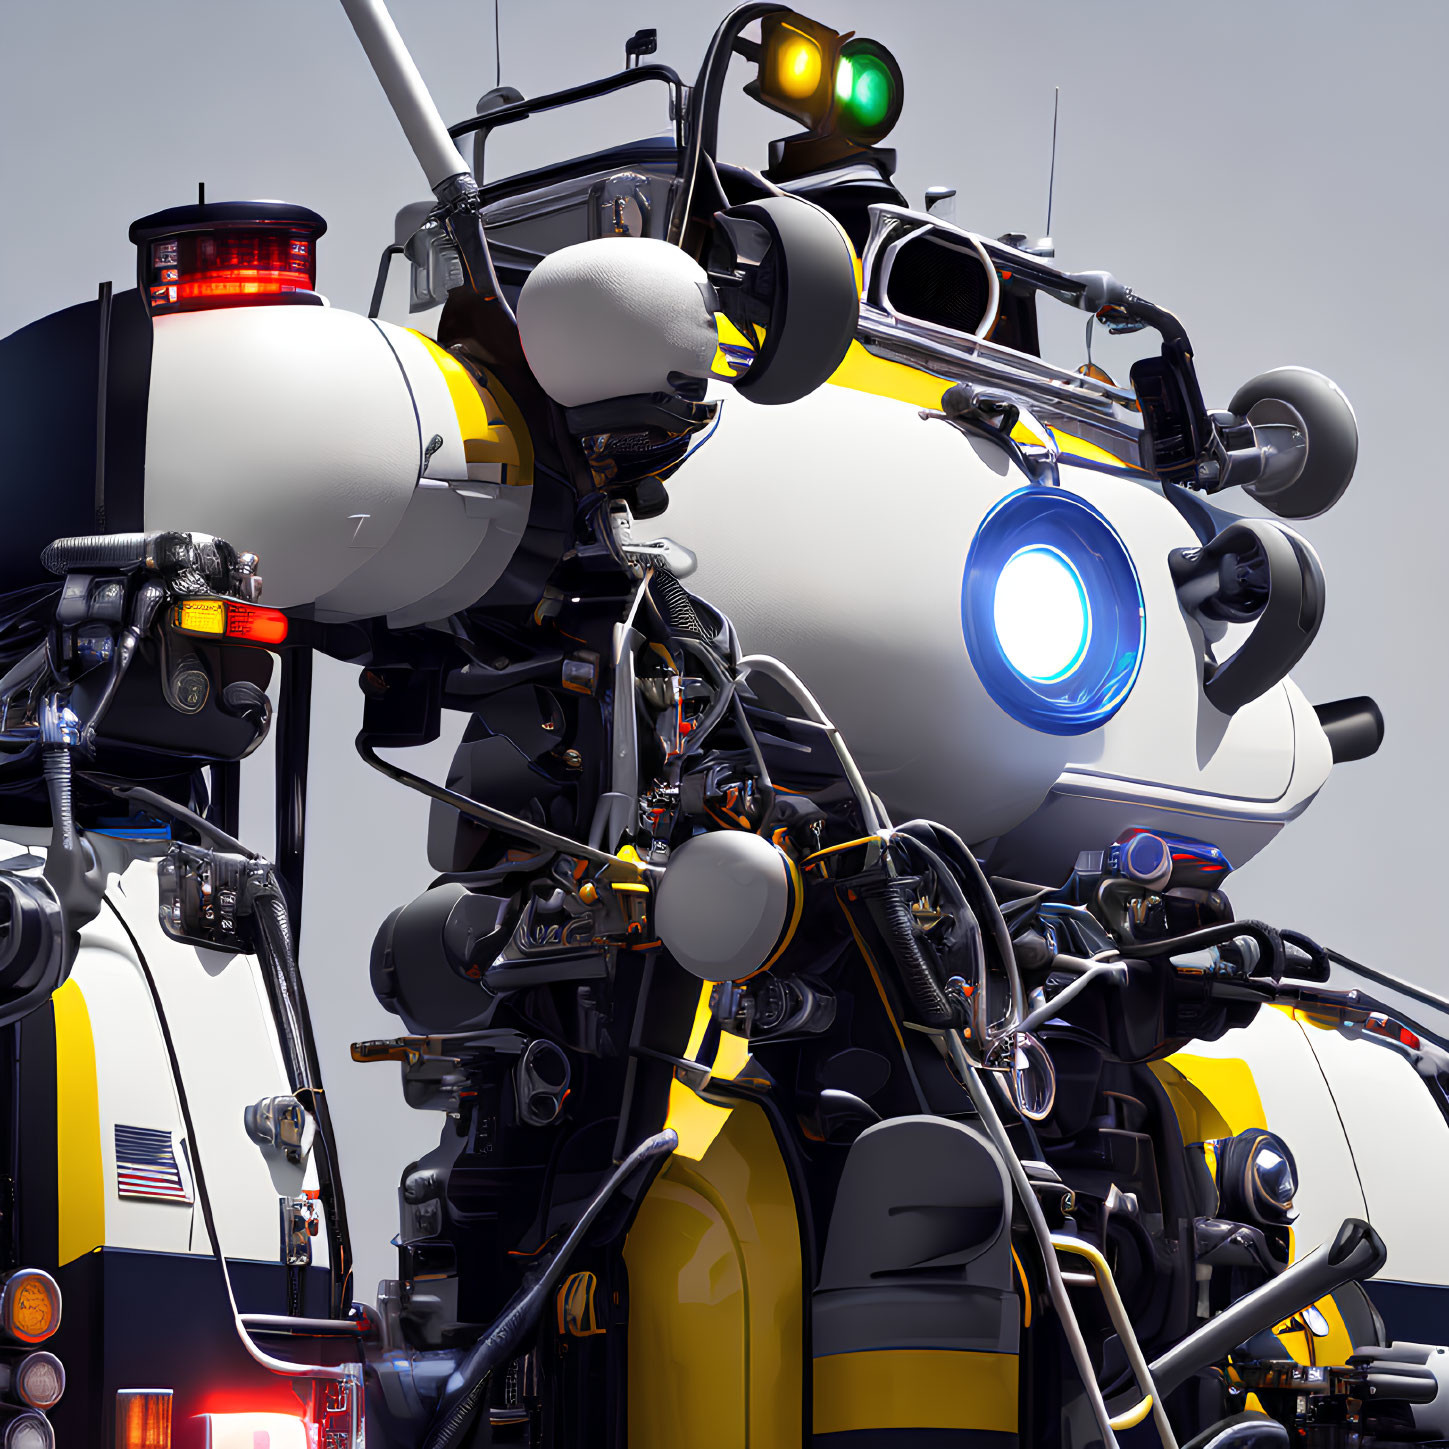 Detailed futuristic robot designed as police vehicle with lights, sirens, and advanced tech